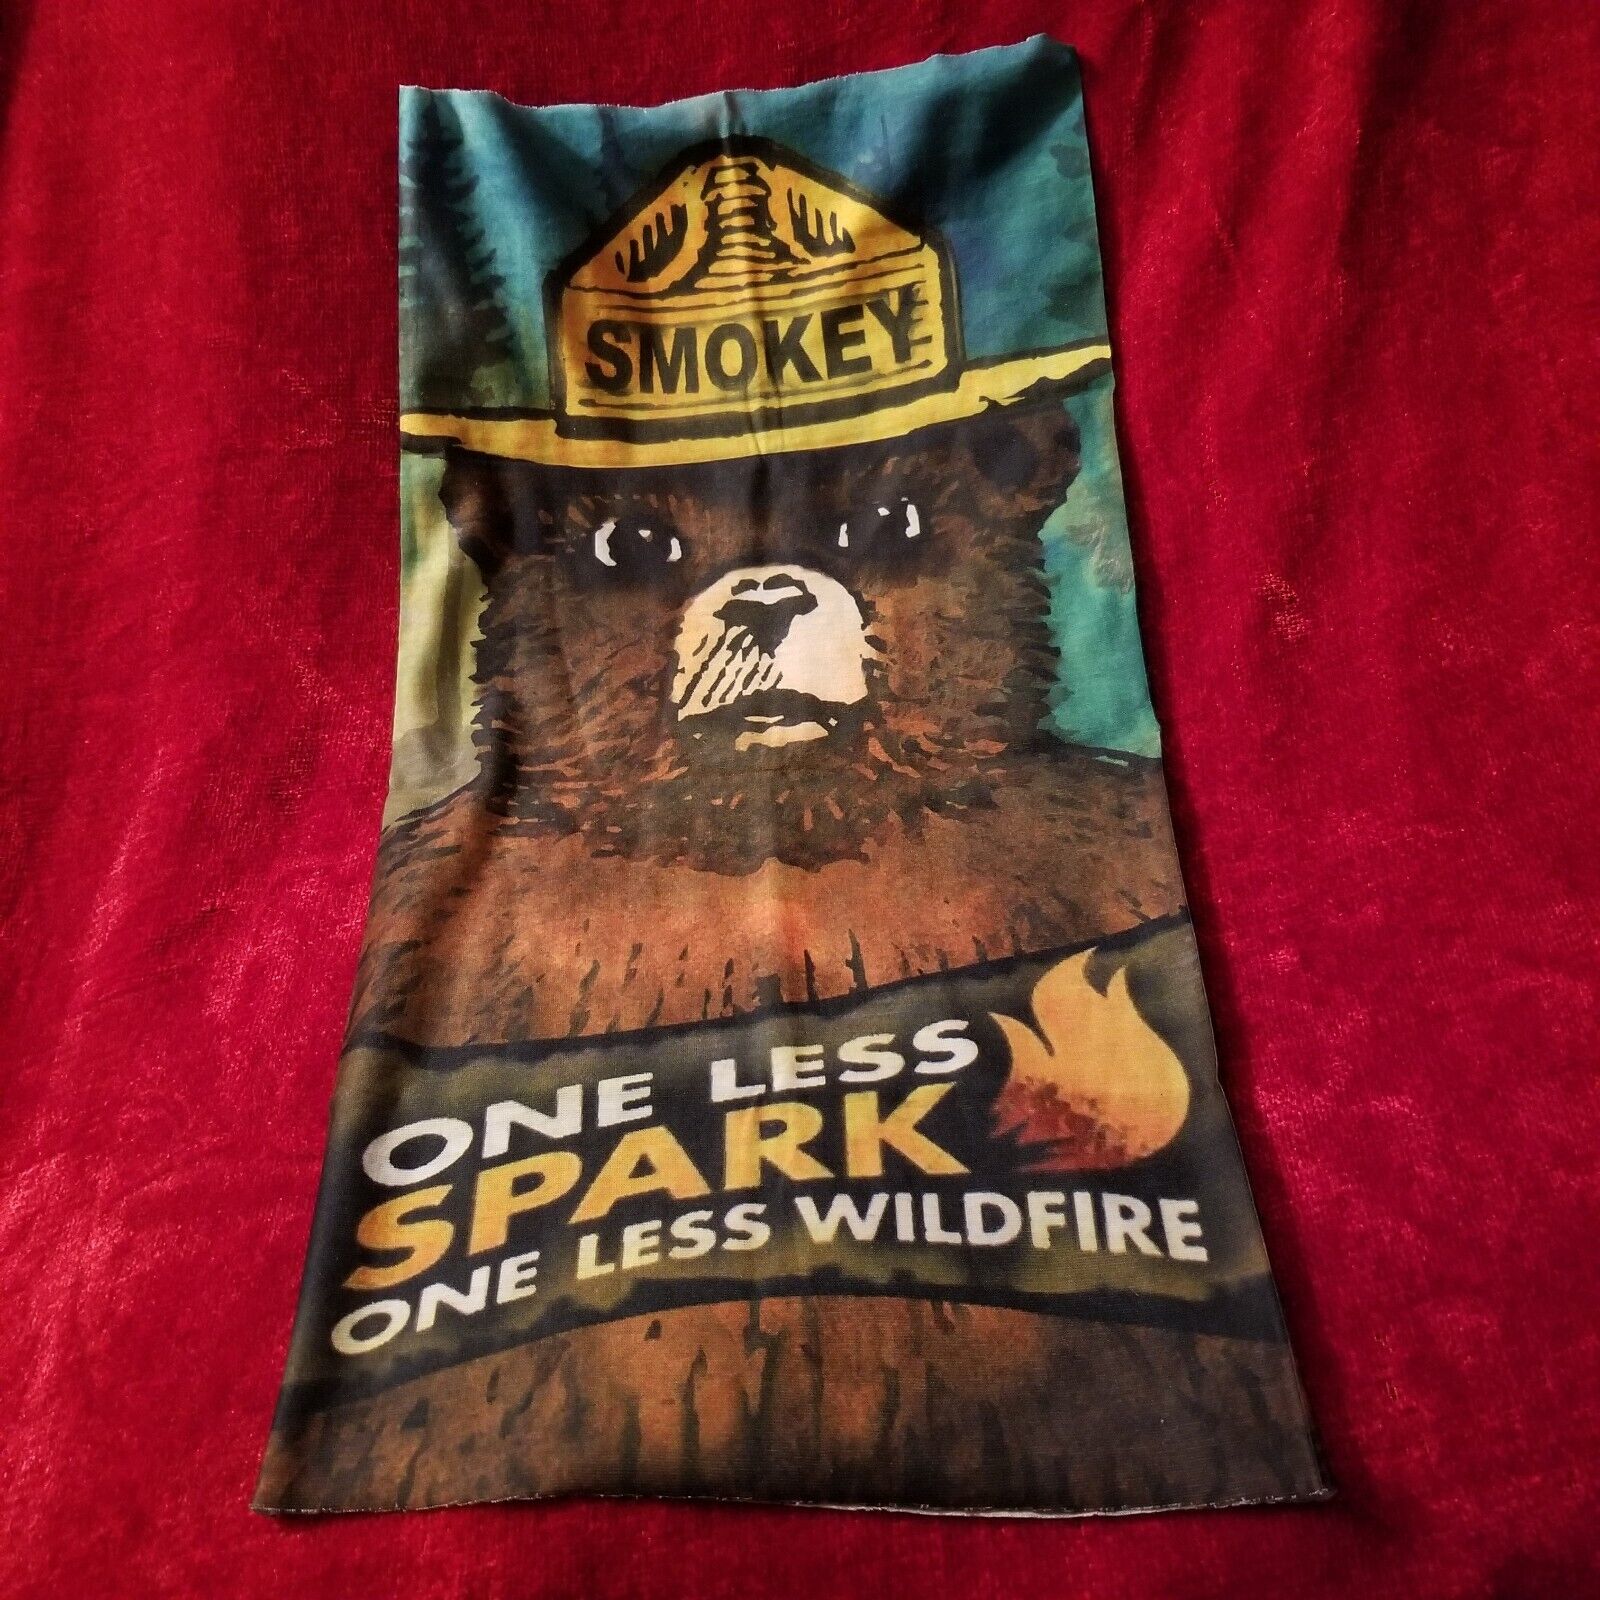 Smokey the Bear - One Less Spark One Less Wildfire - Face Mask Gator - New